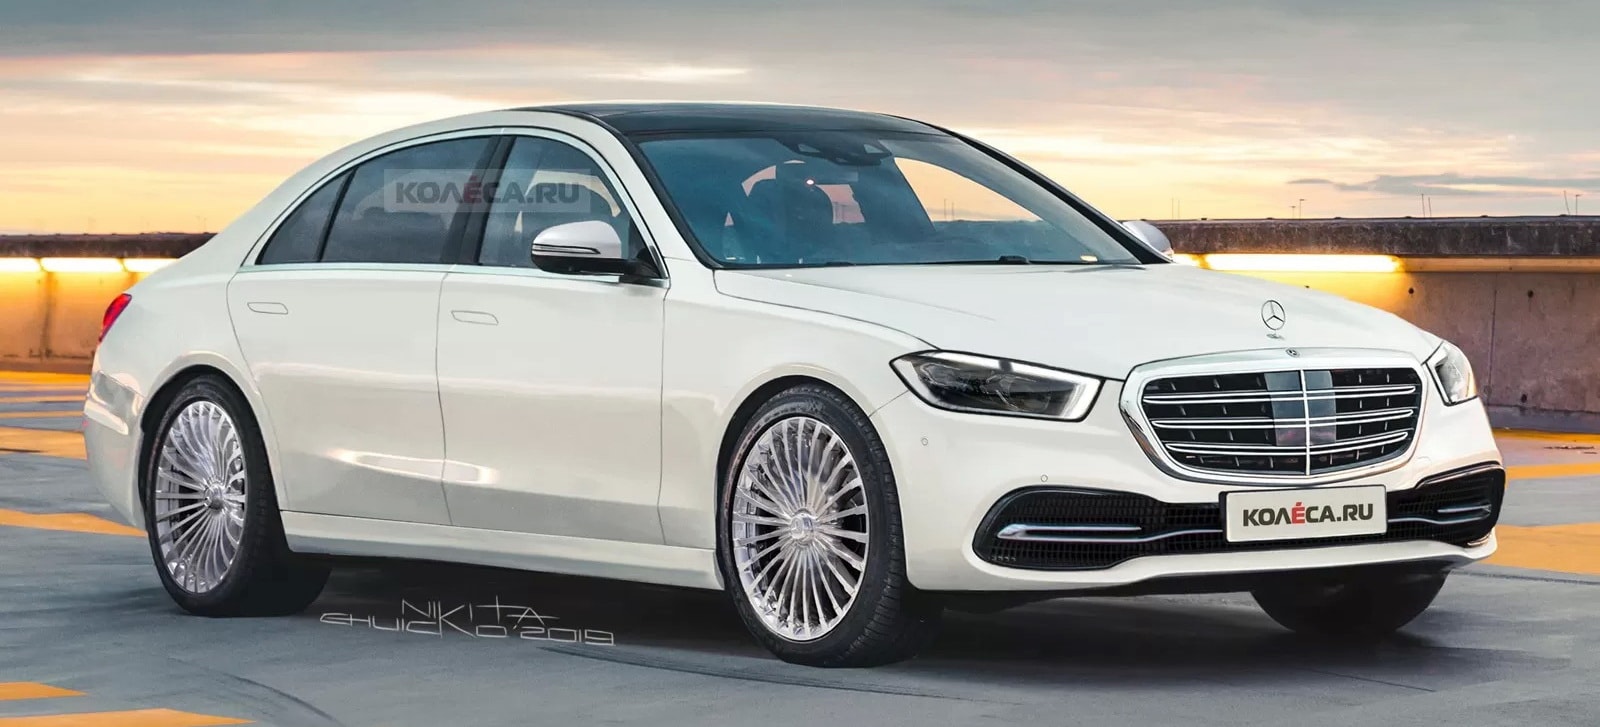 2021 Mercedes S-Class More Accurately Rendered, Is as Good ...